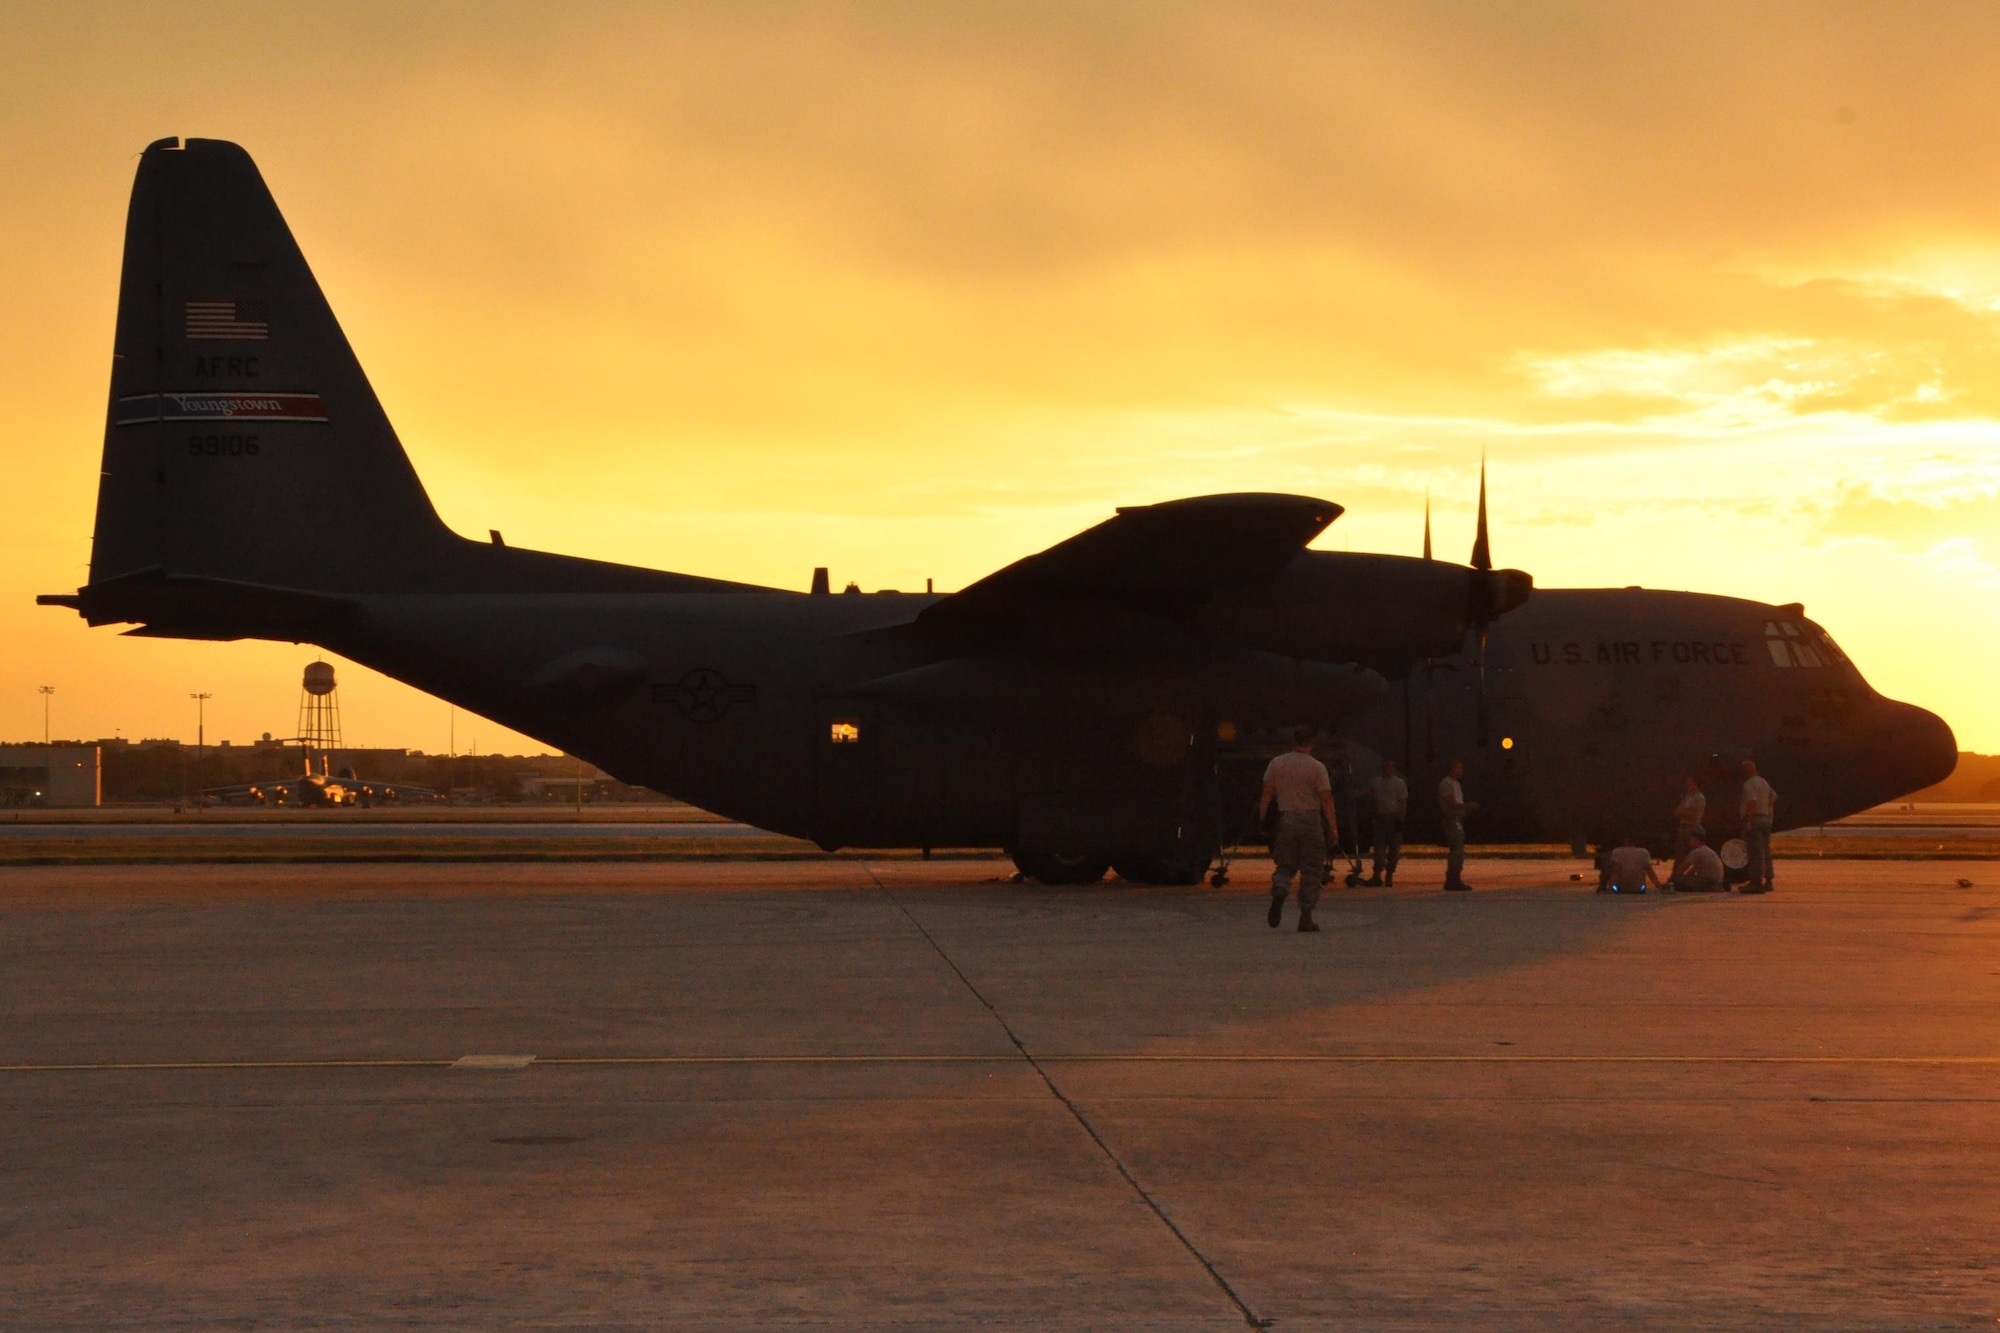 After launch at Kelly Field: activity continues at the 910th’s aerial spray ops base